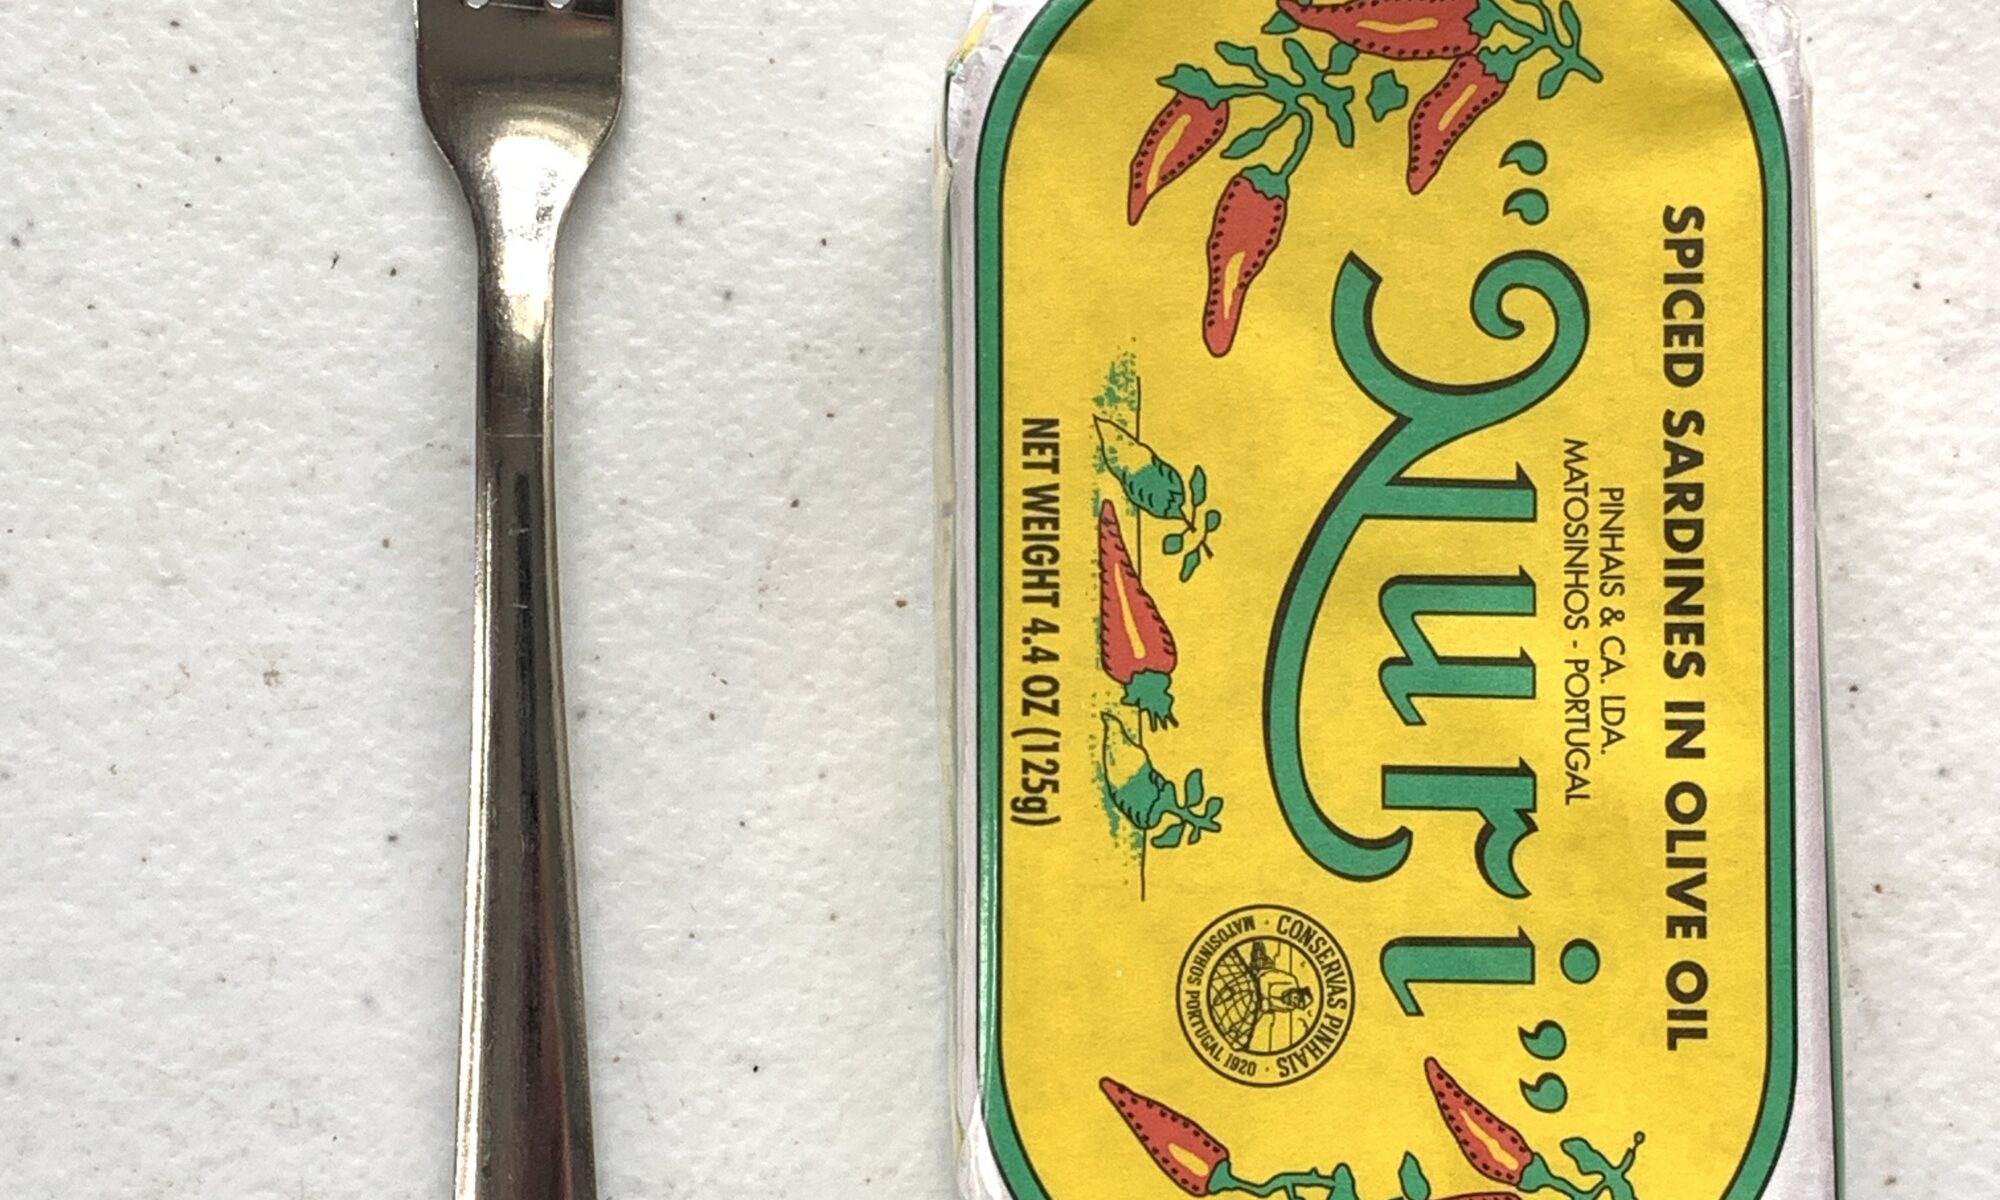 Image of a Cocktail Fork, Choice Windsor, Stainless Steel next to a tin of sardines for scale